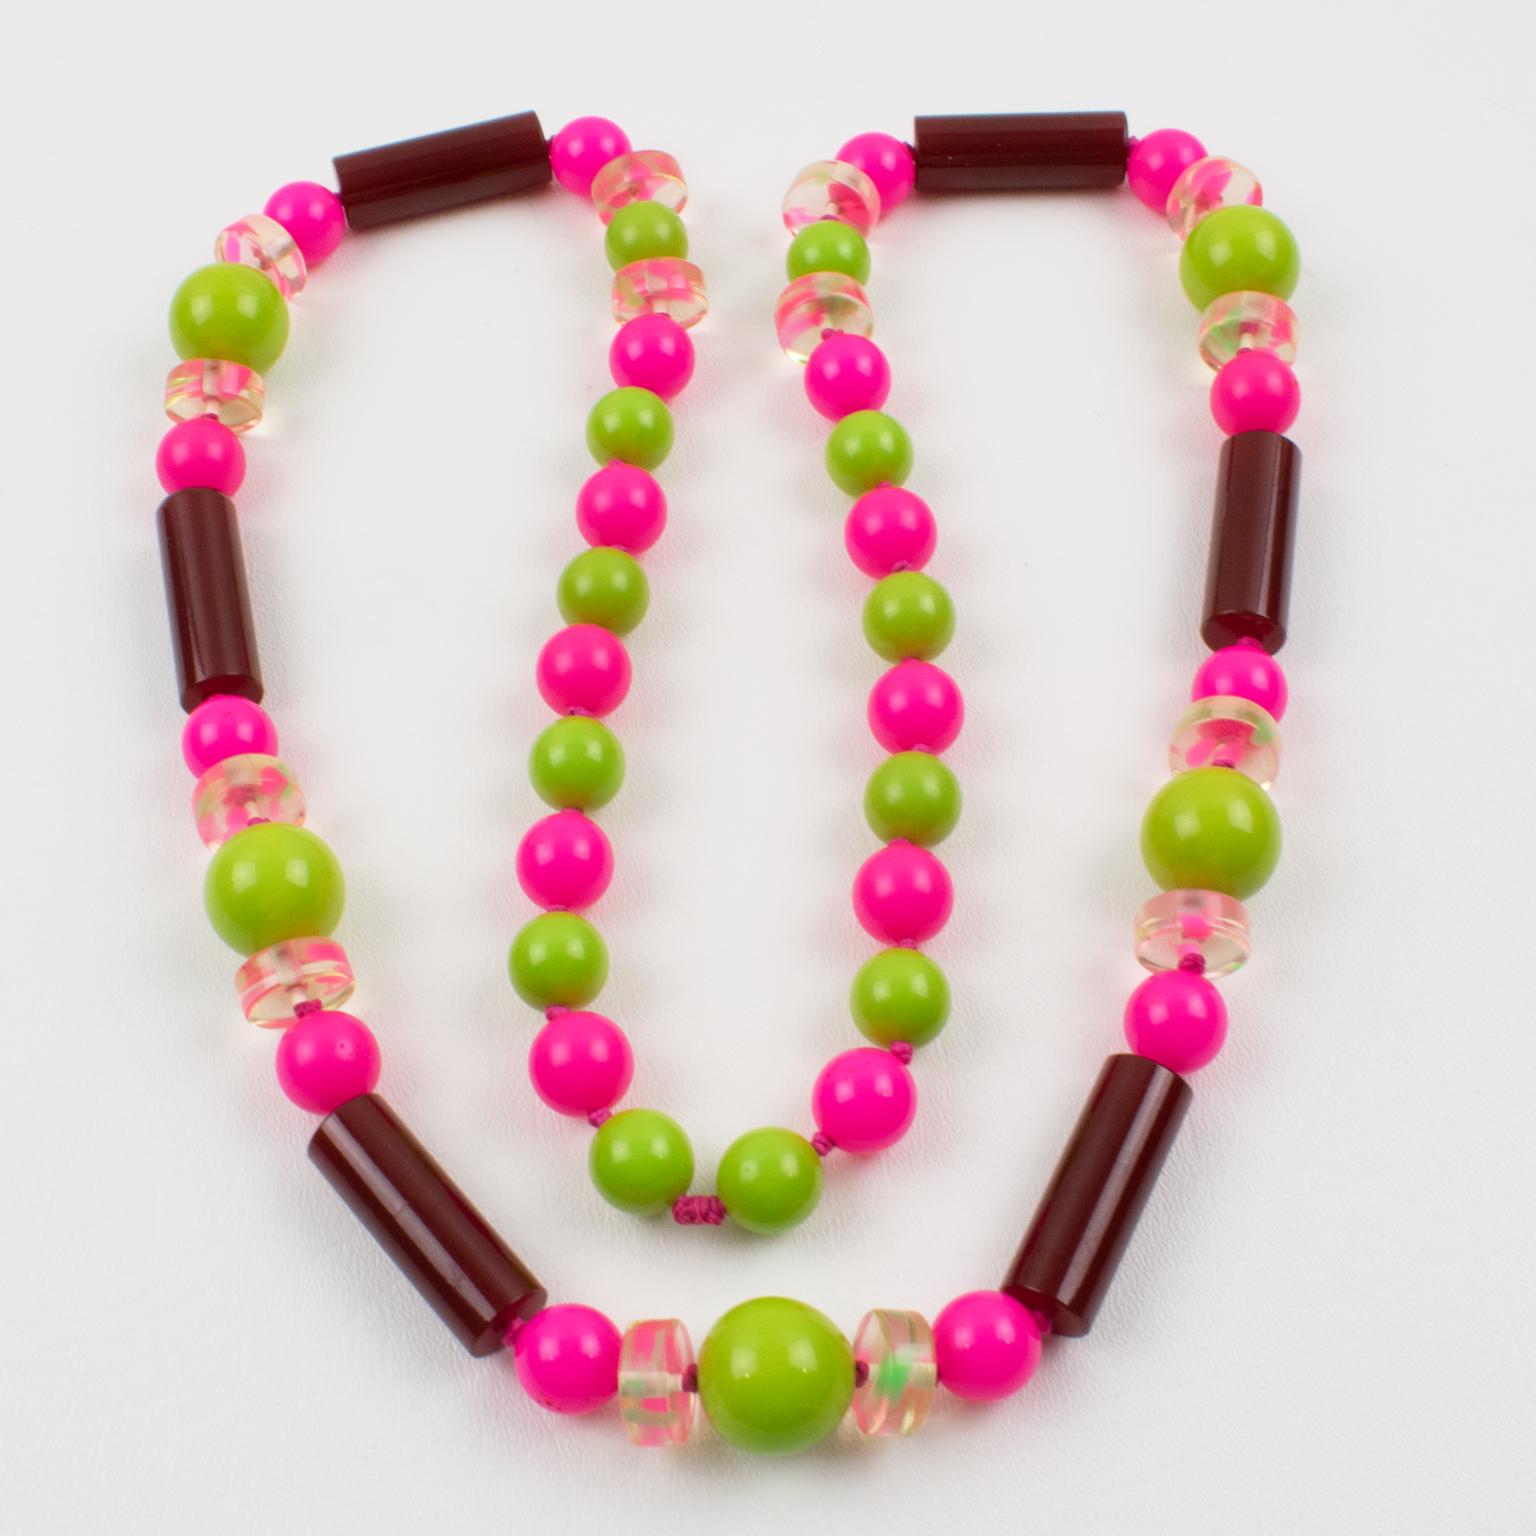 Modern Bakelite and Lucite Extra Long Necklace Burgundy, Hot Pink, Apple Green Beads For Sale